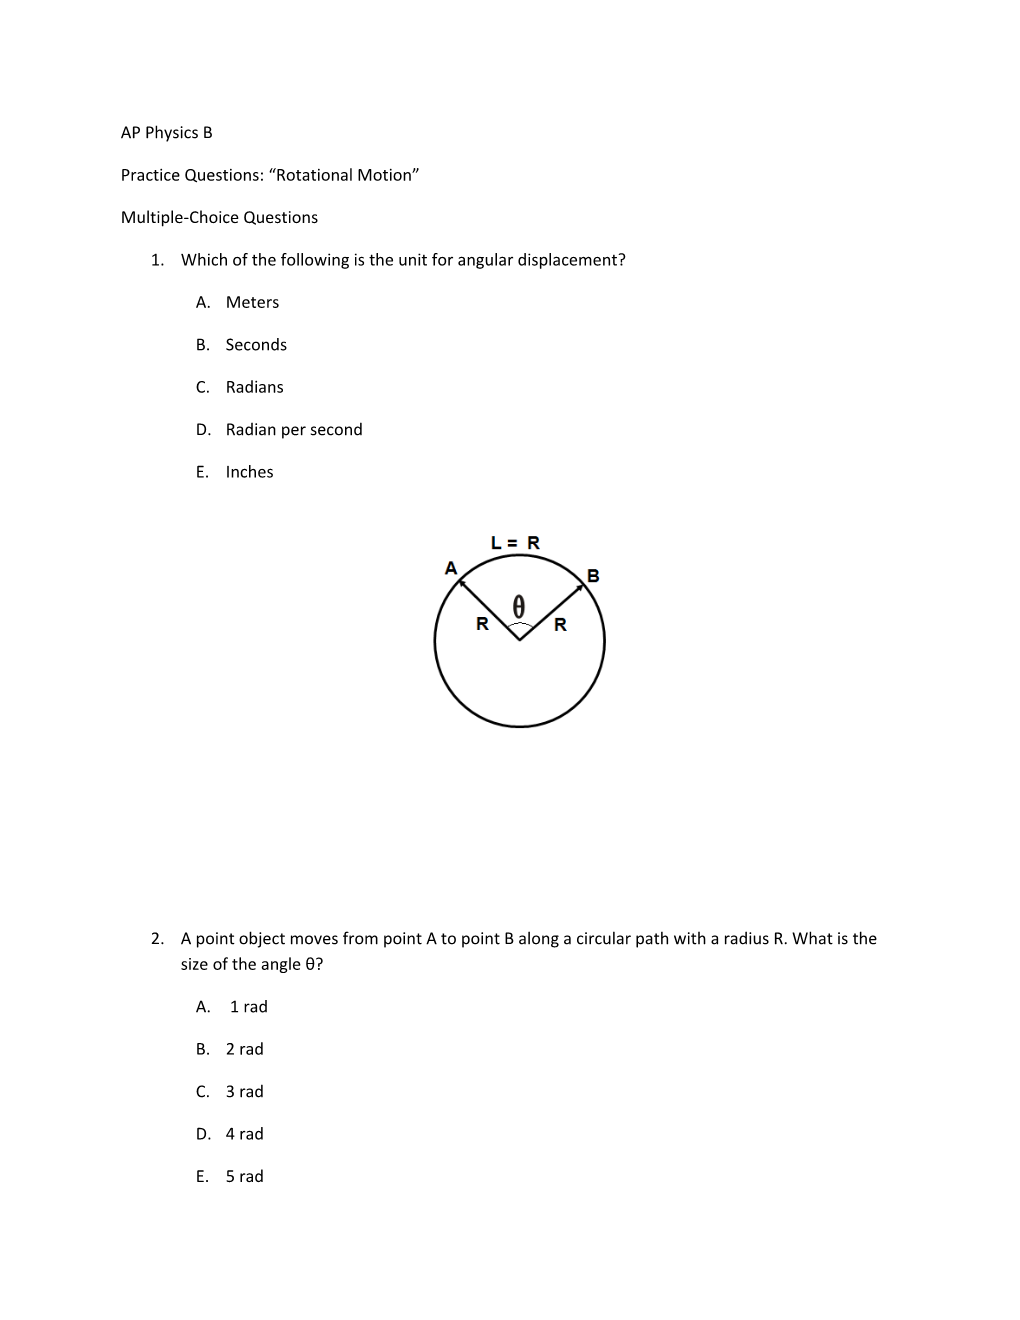 Practice Questions: Rotational Motion